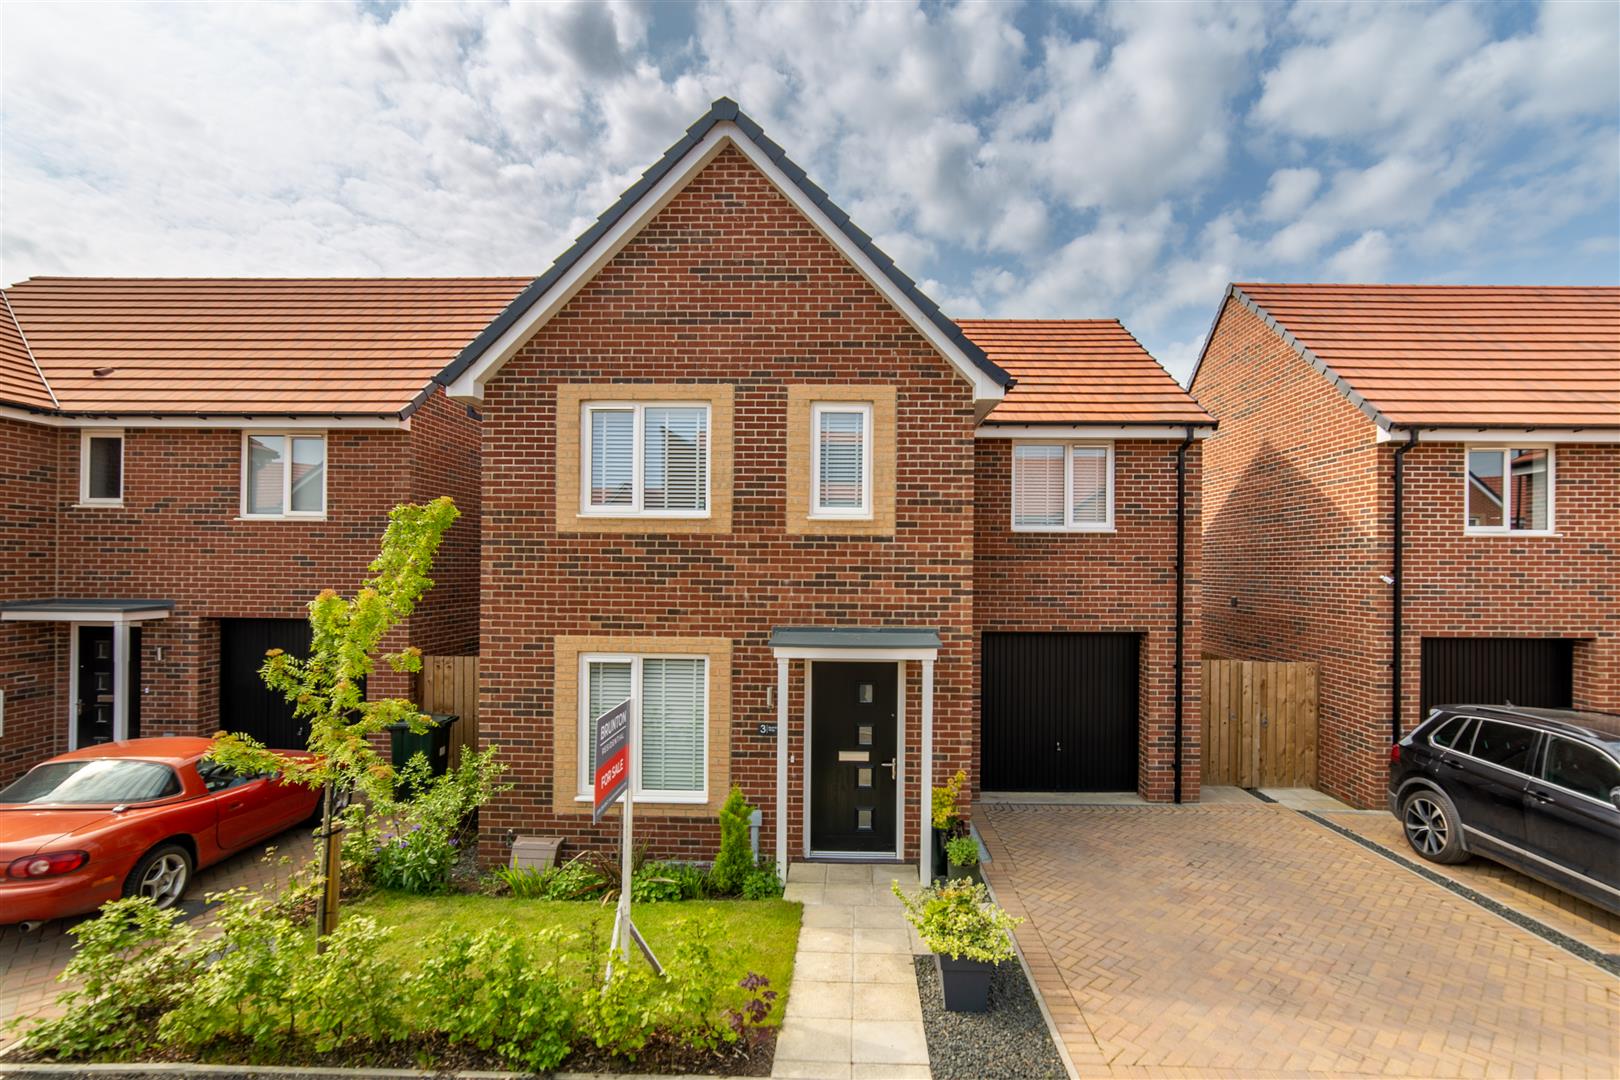 3 bed detached house for sale in Bramble Way, Great Park, NE13